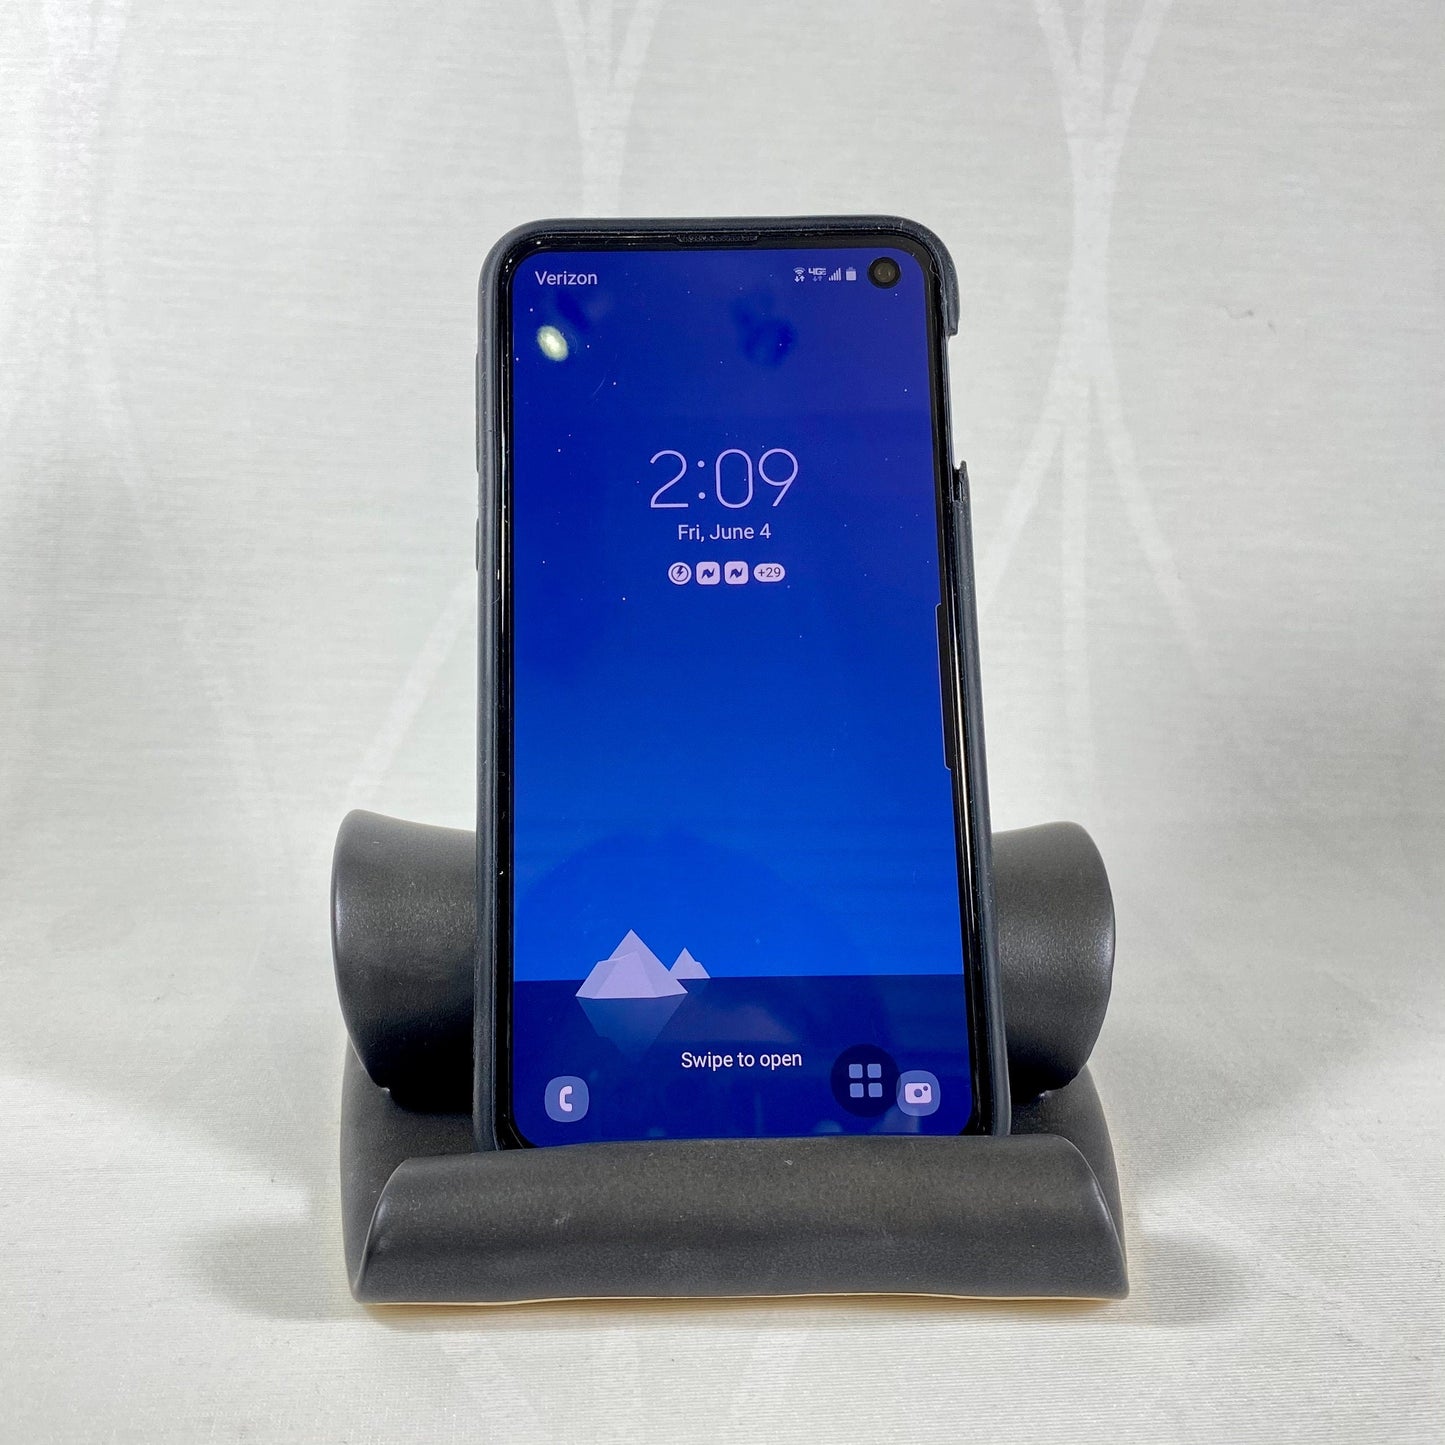 Handmade Black Cell Phone Stand, Functional and Decorative Pottery